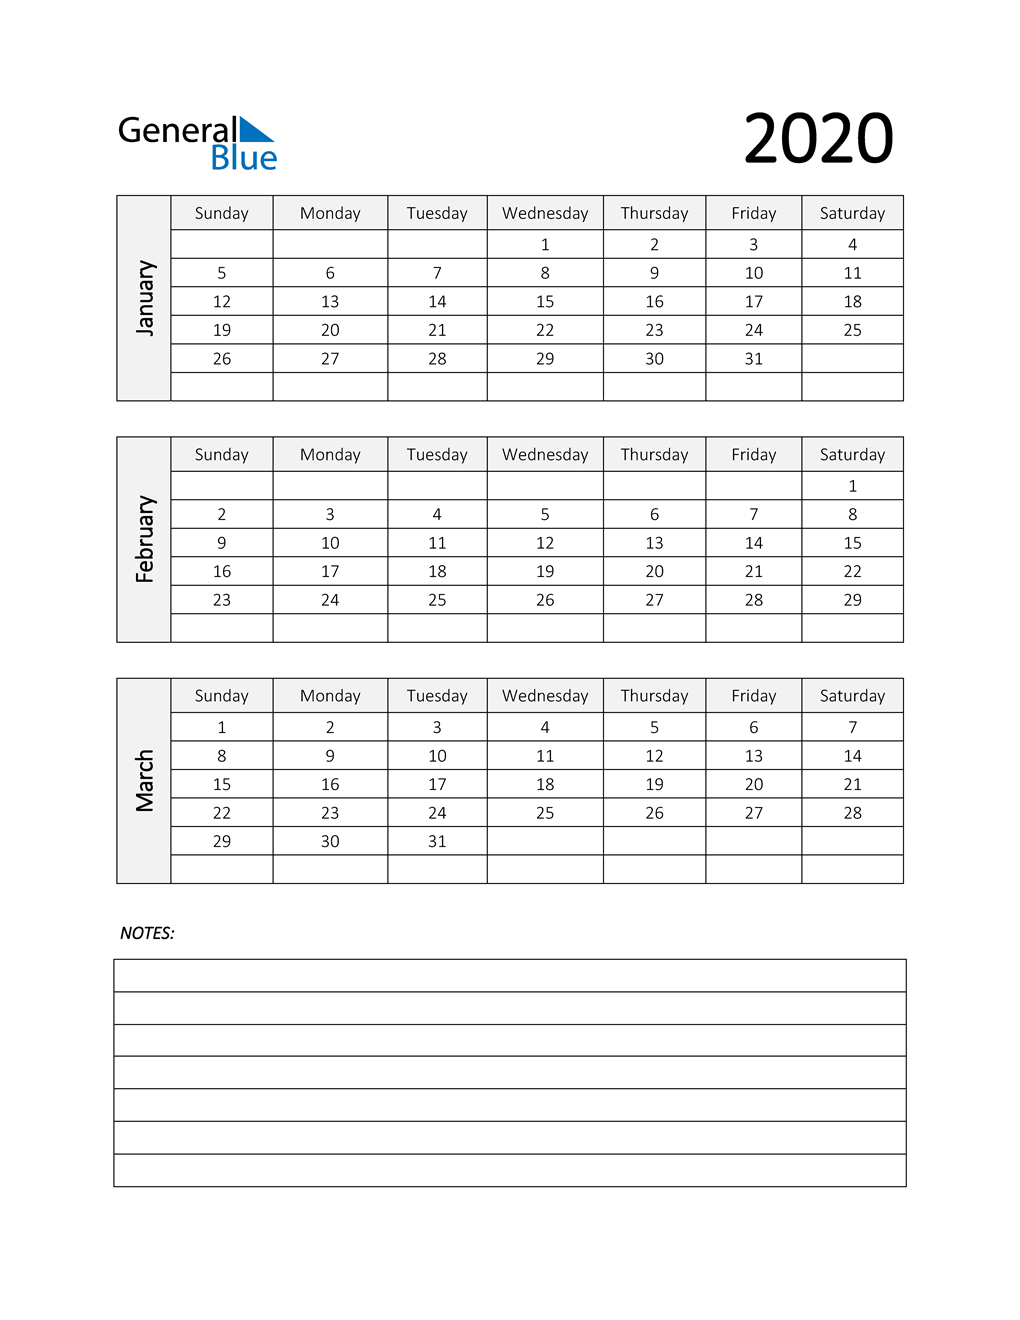  Q1 2020 Calendar with Notes